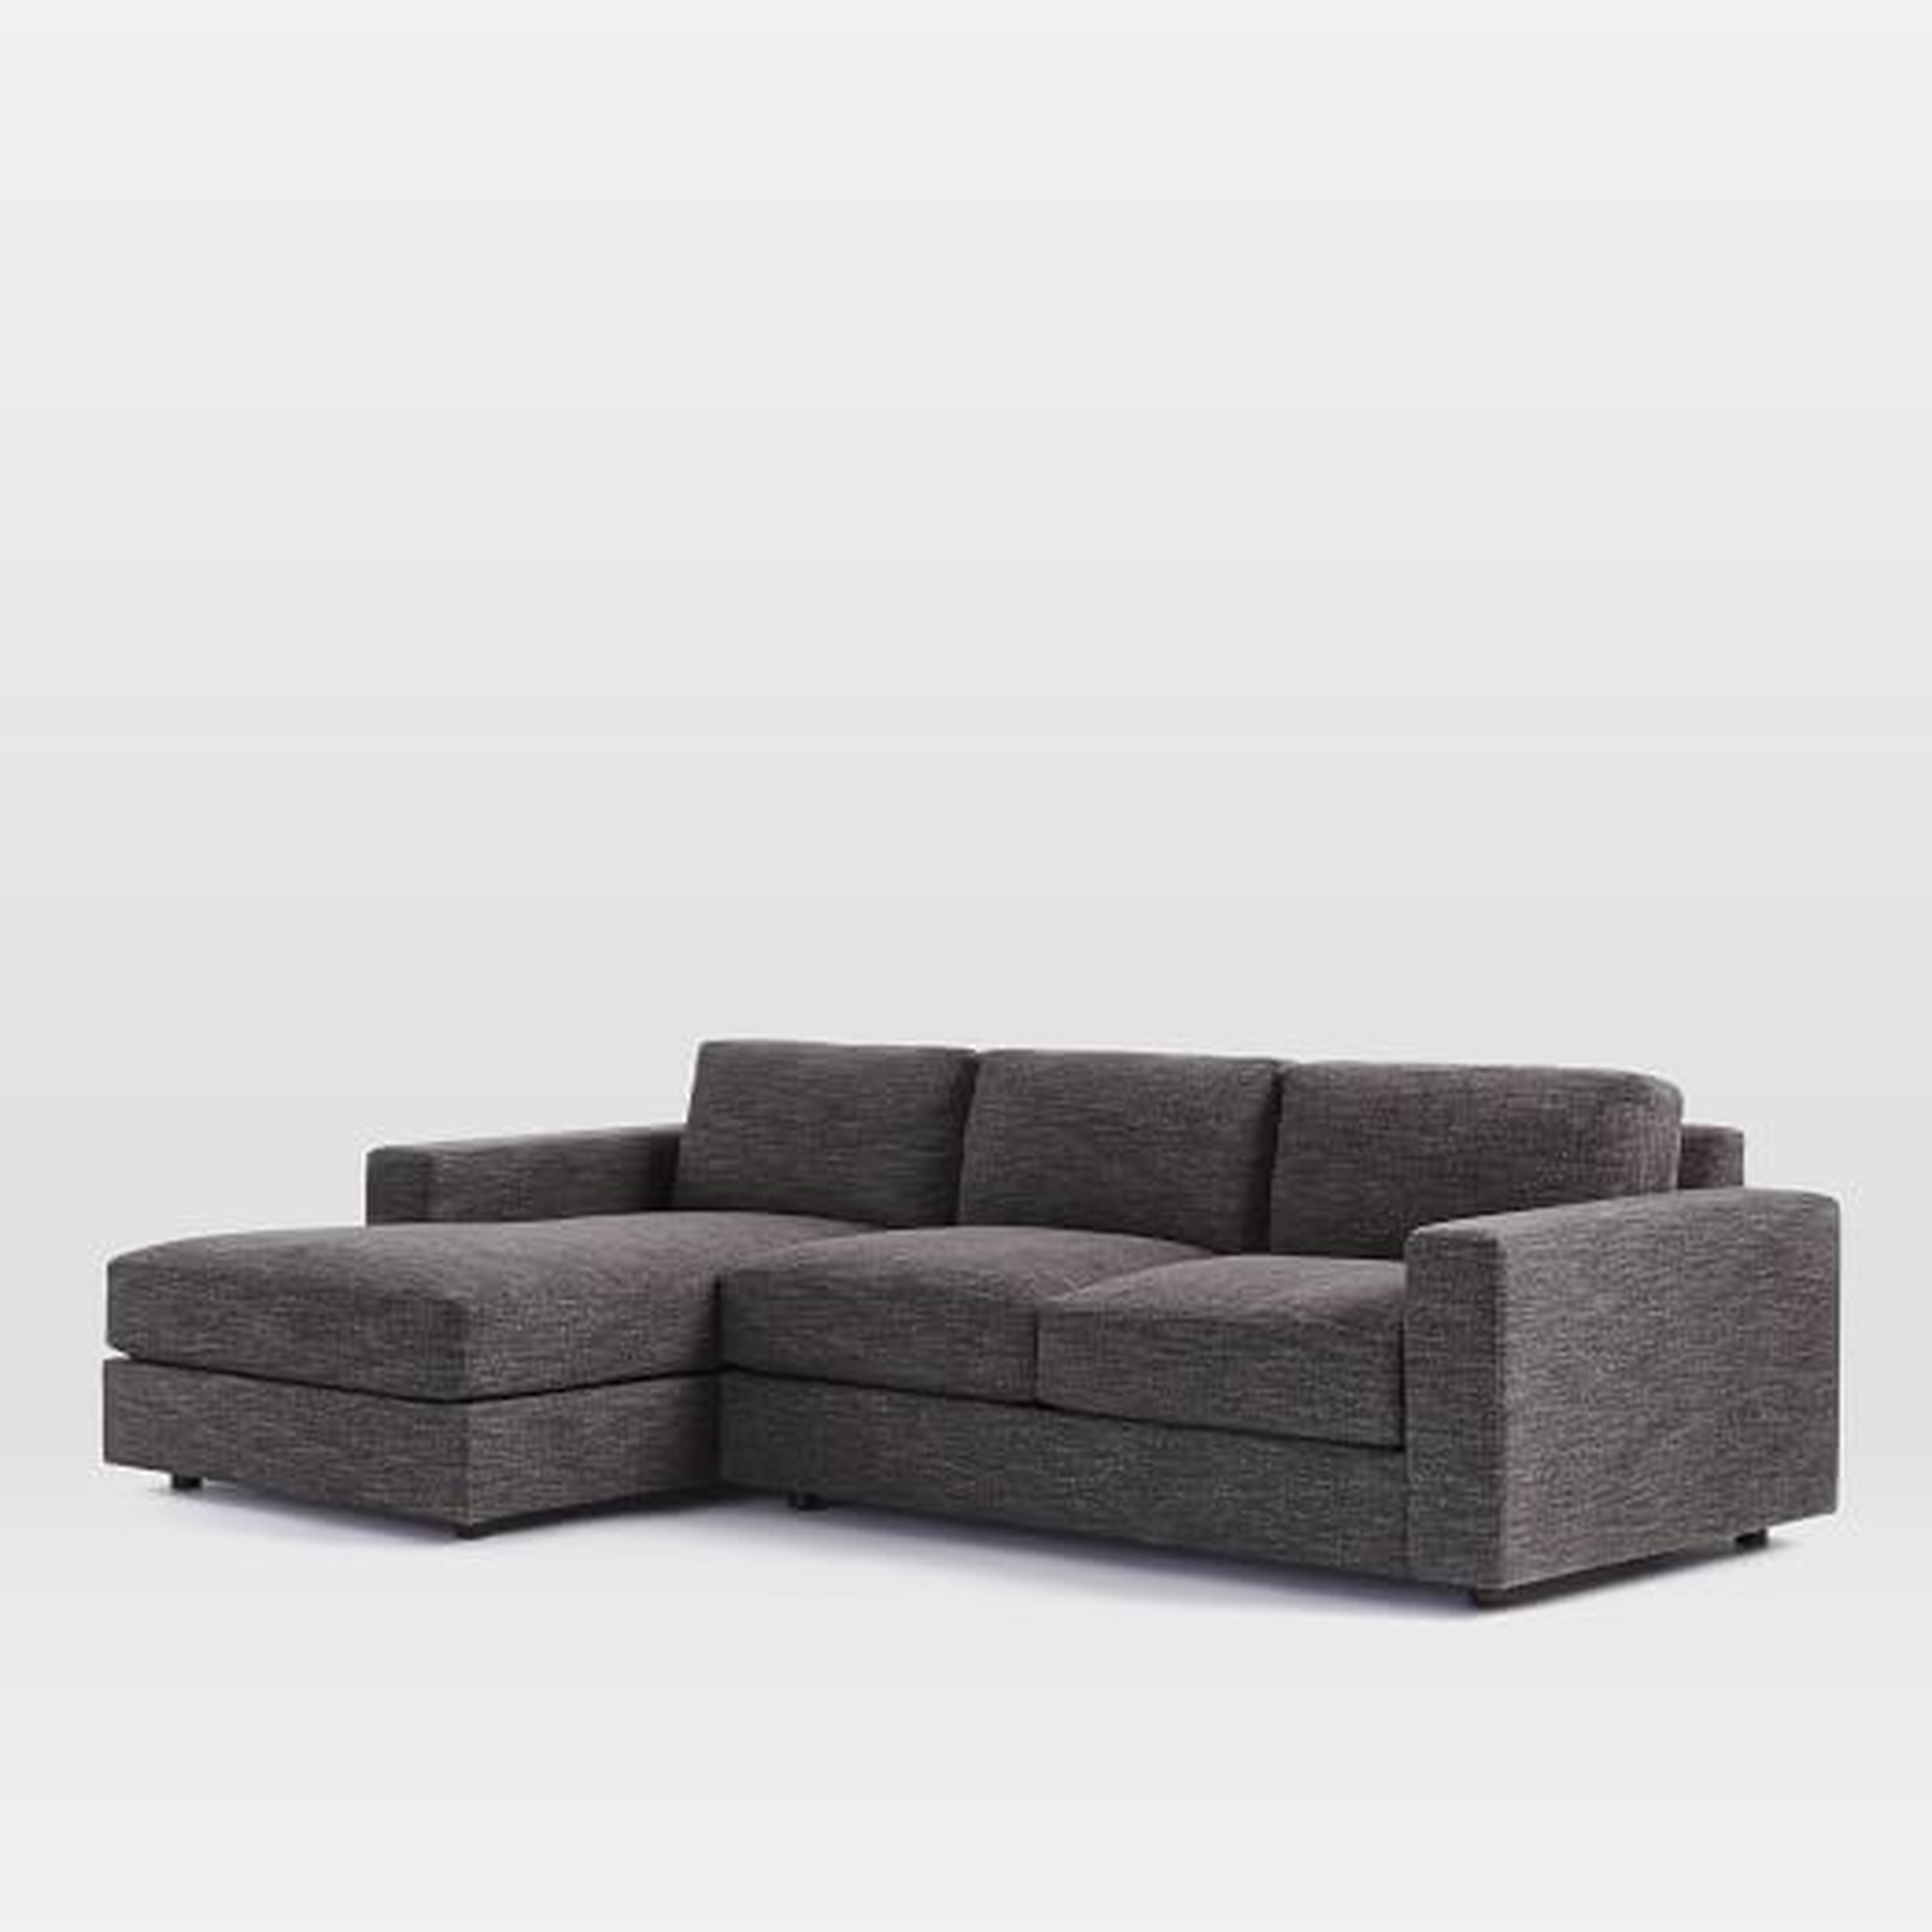 Urban 2-Piece Chaise Sectional - Small (Left Chaise), Heathered Tweed Charcoal - West Elm